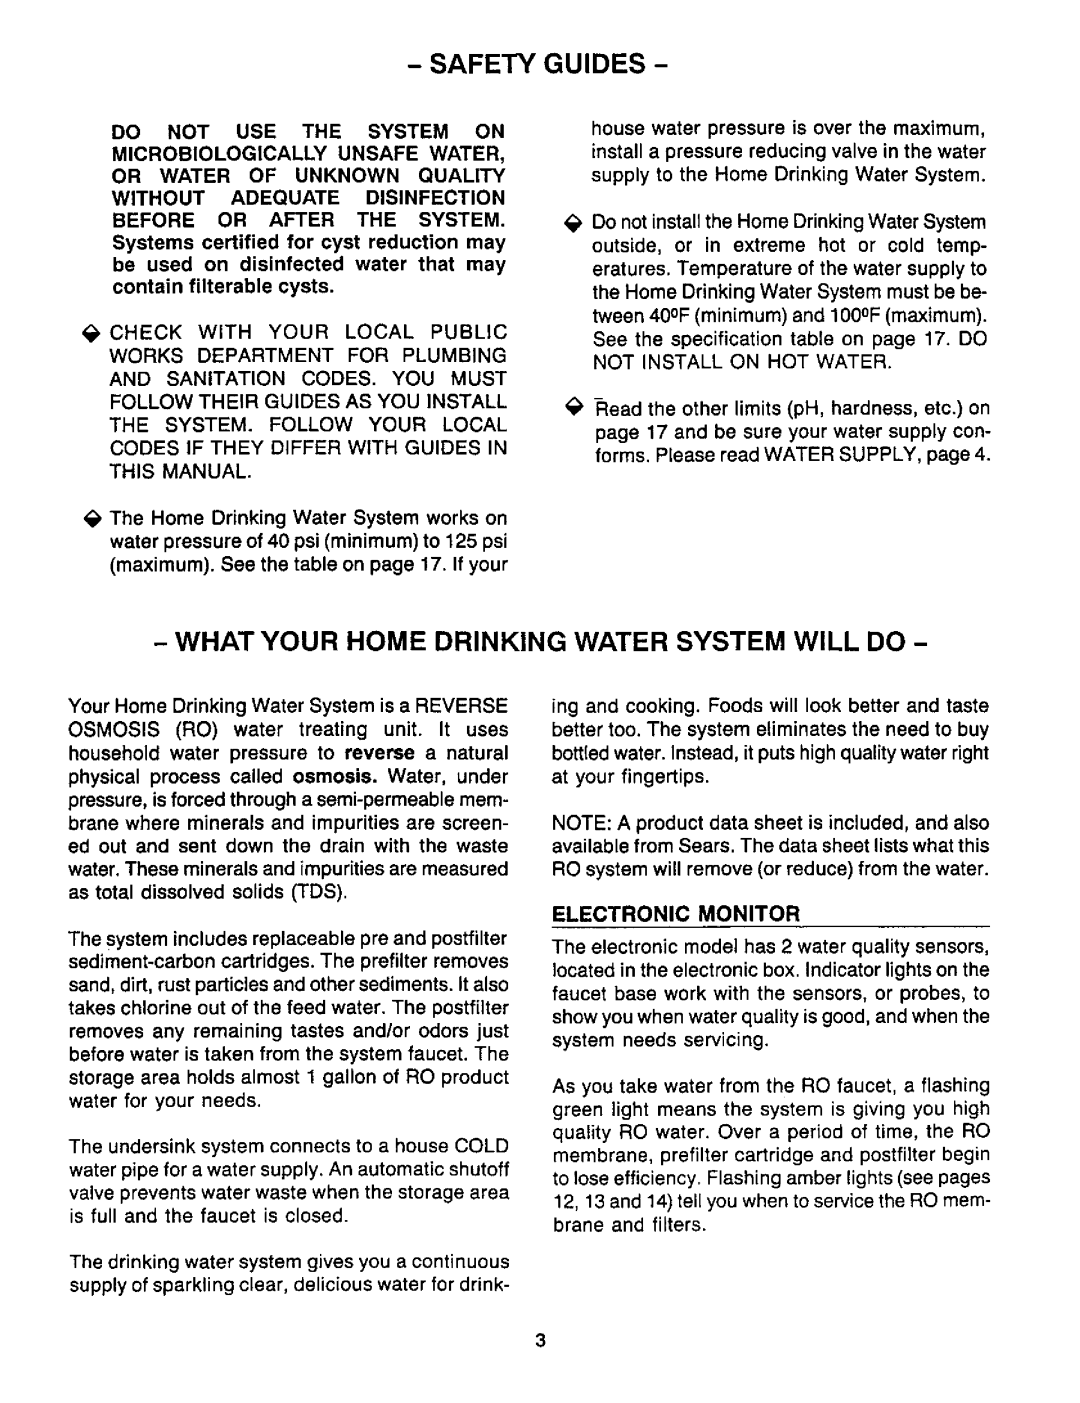 Sears RO 2000 manual Safety Guides, What Your Home Drinking Water System Will Do, Electronic Monitor 